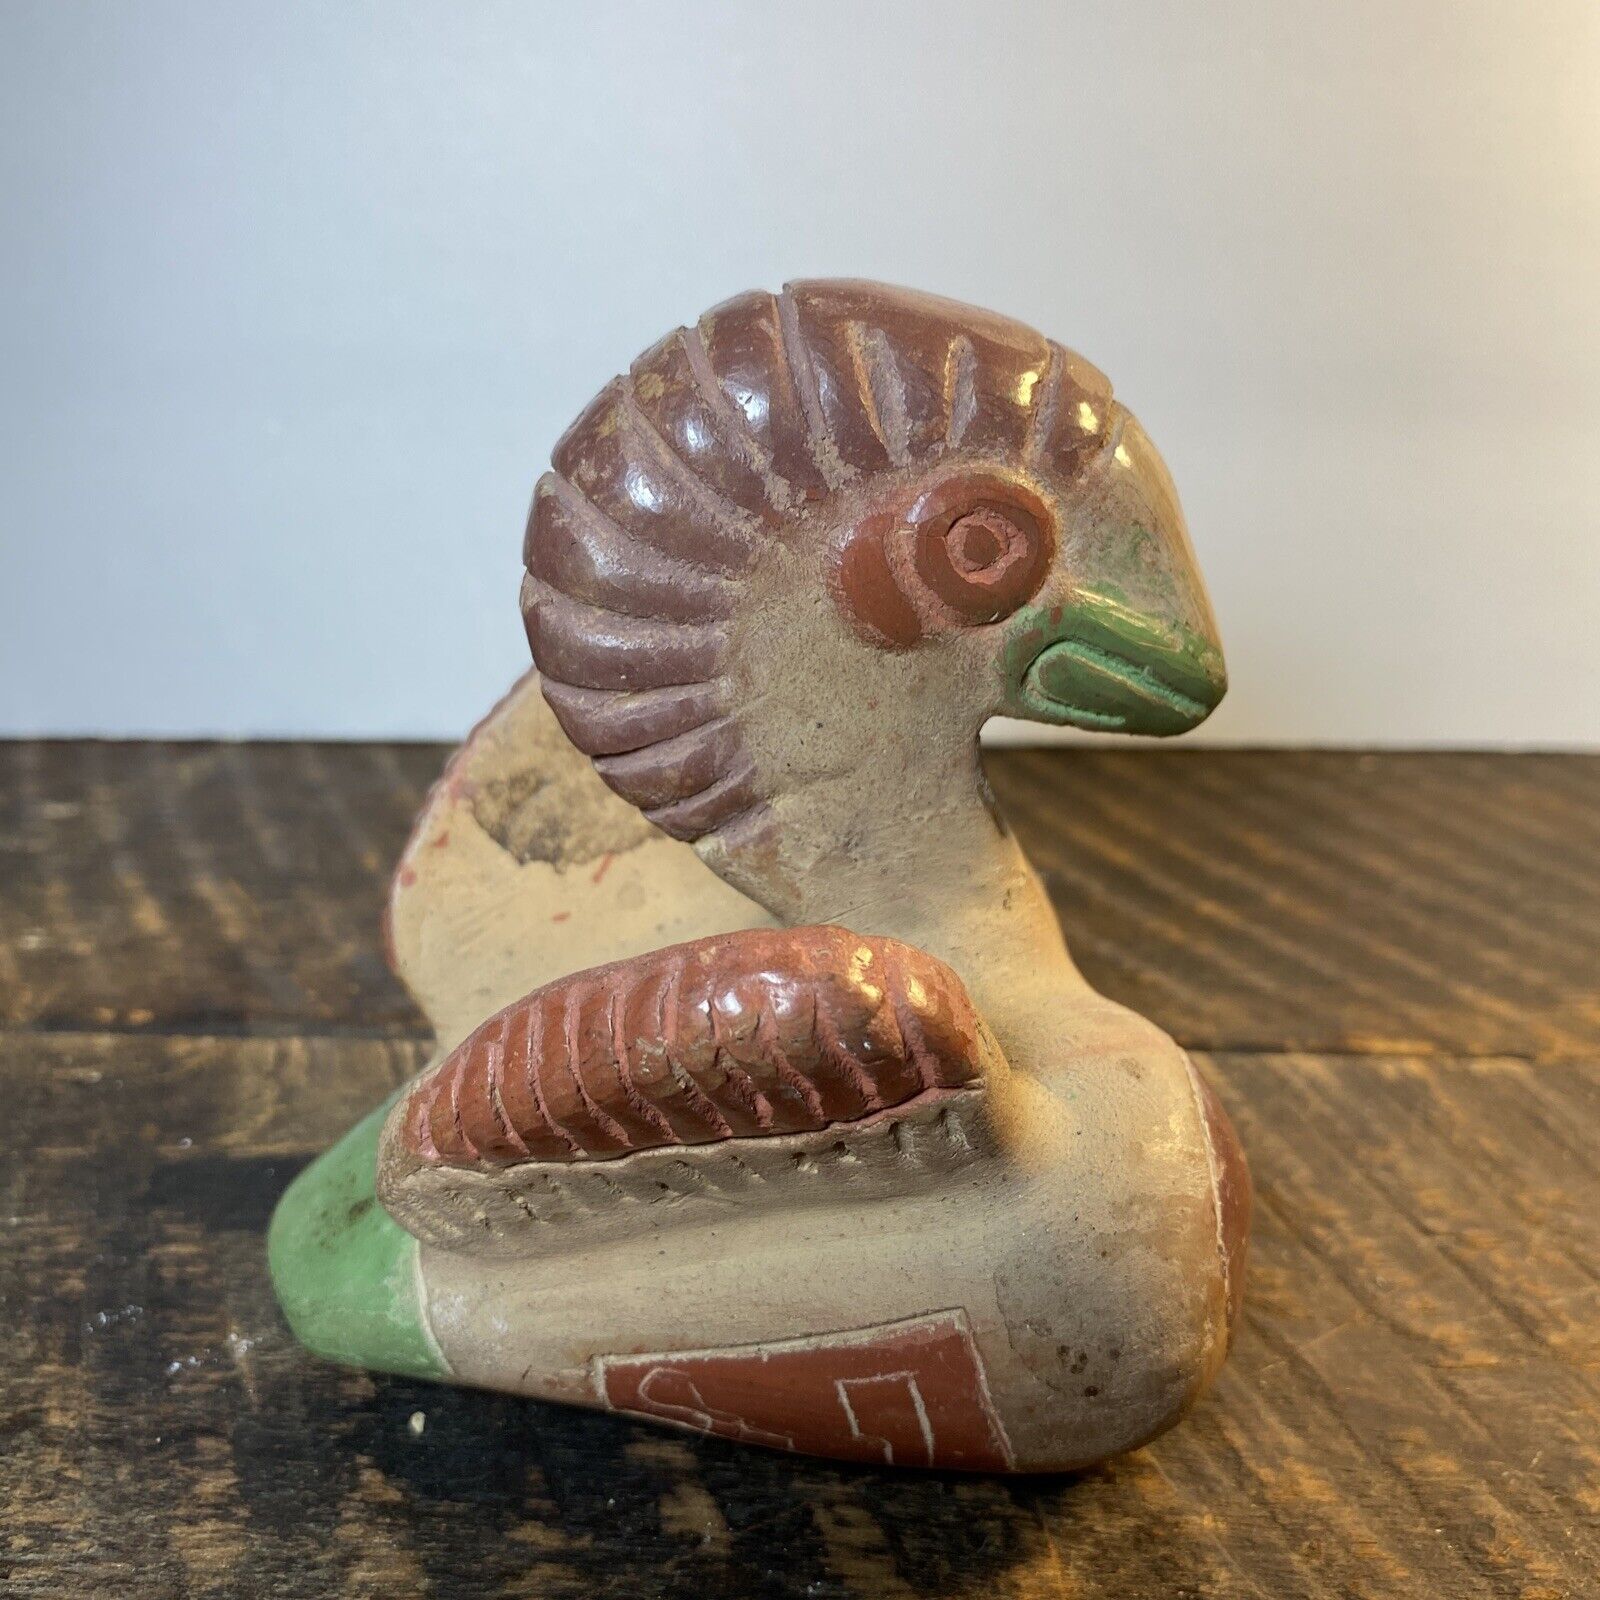 Early 20thC Mexican-Made Replica Of Mayan Bird Whistles.  3.5”x3.5”x4” Clay